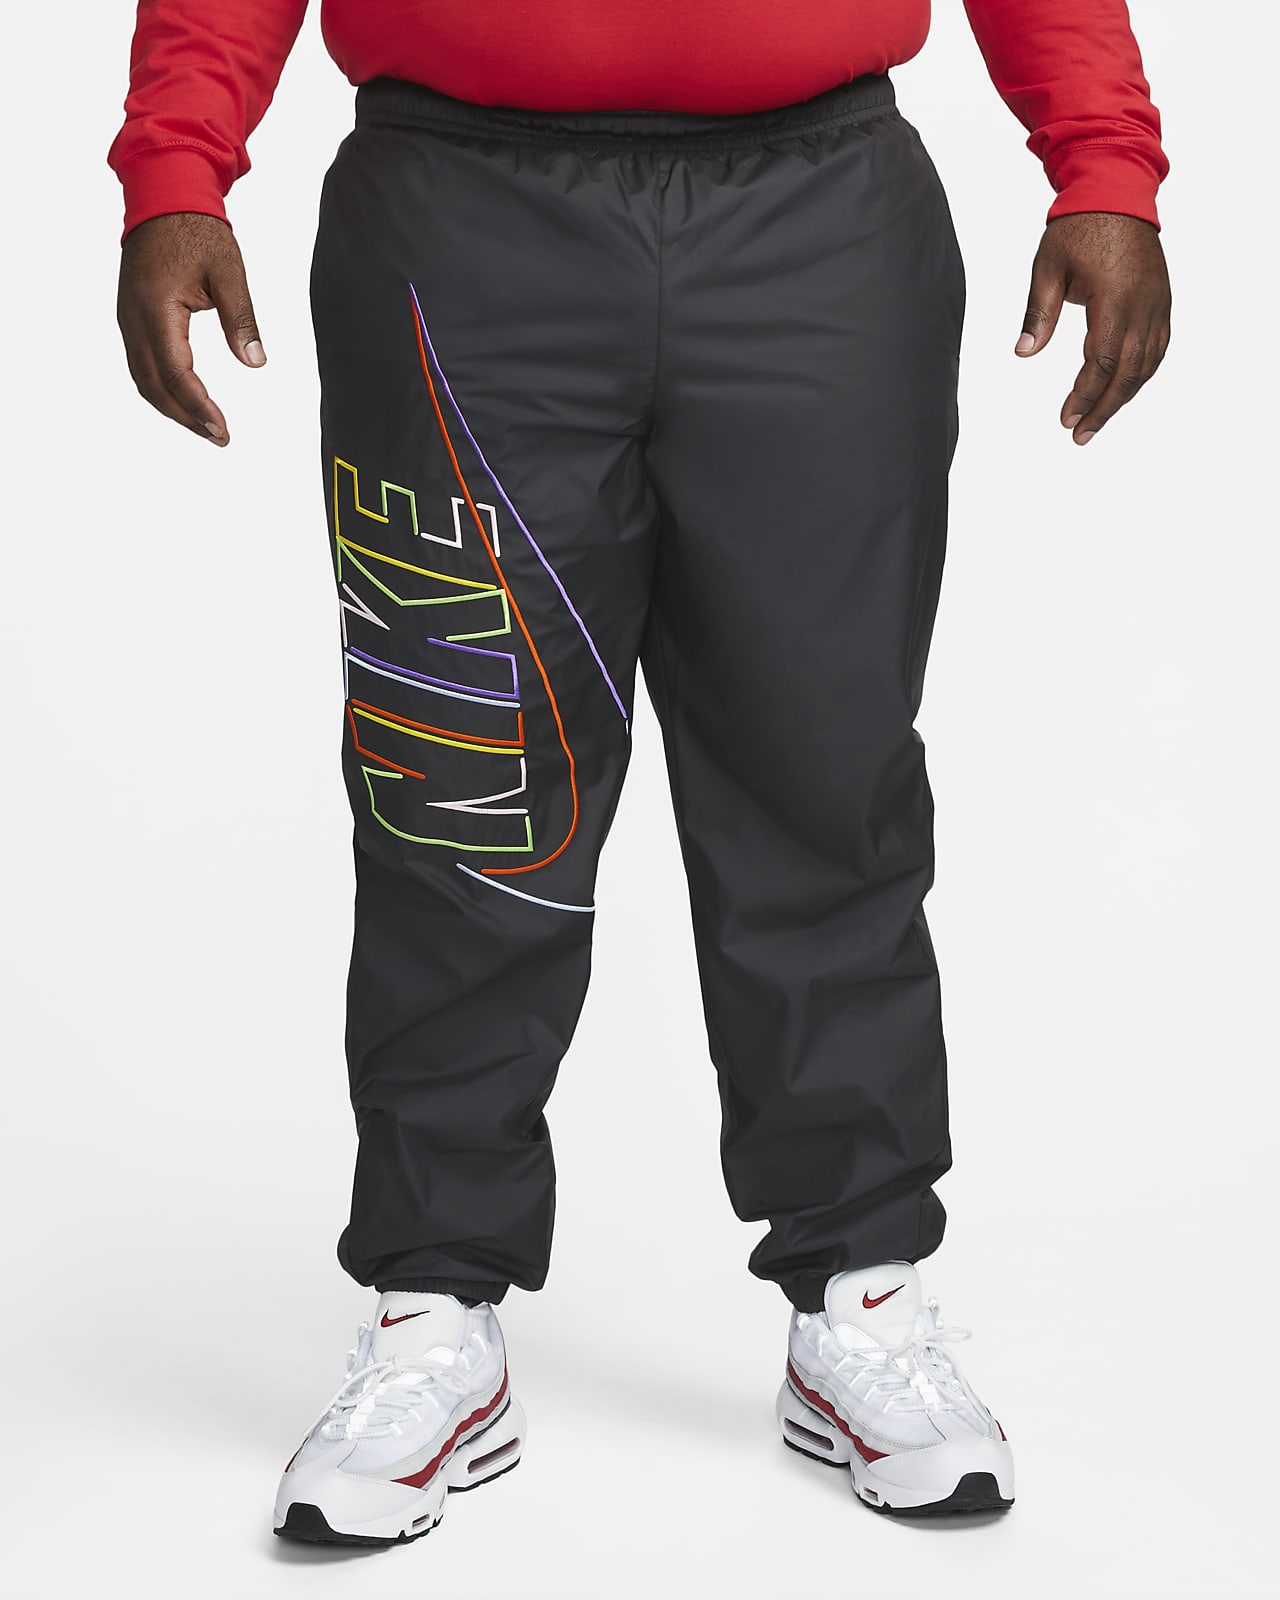 Under Armour Sport Woven Pants, Pants, Clothing & Accessories